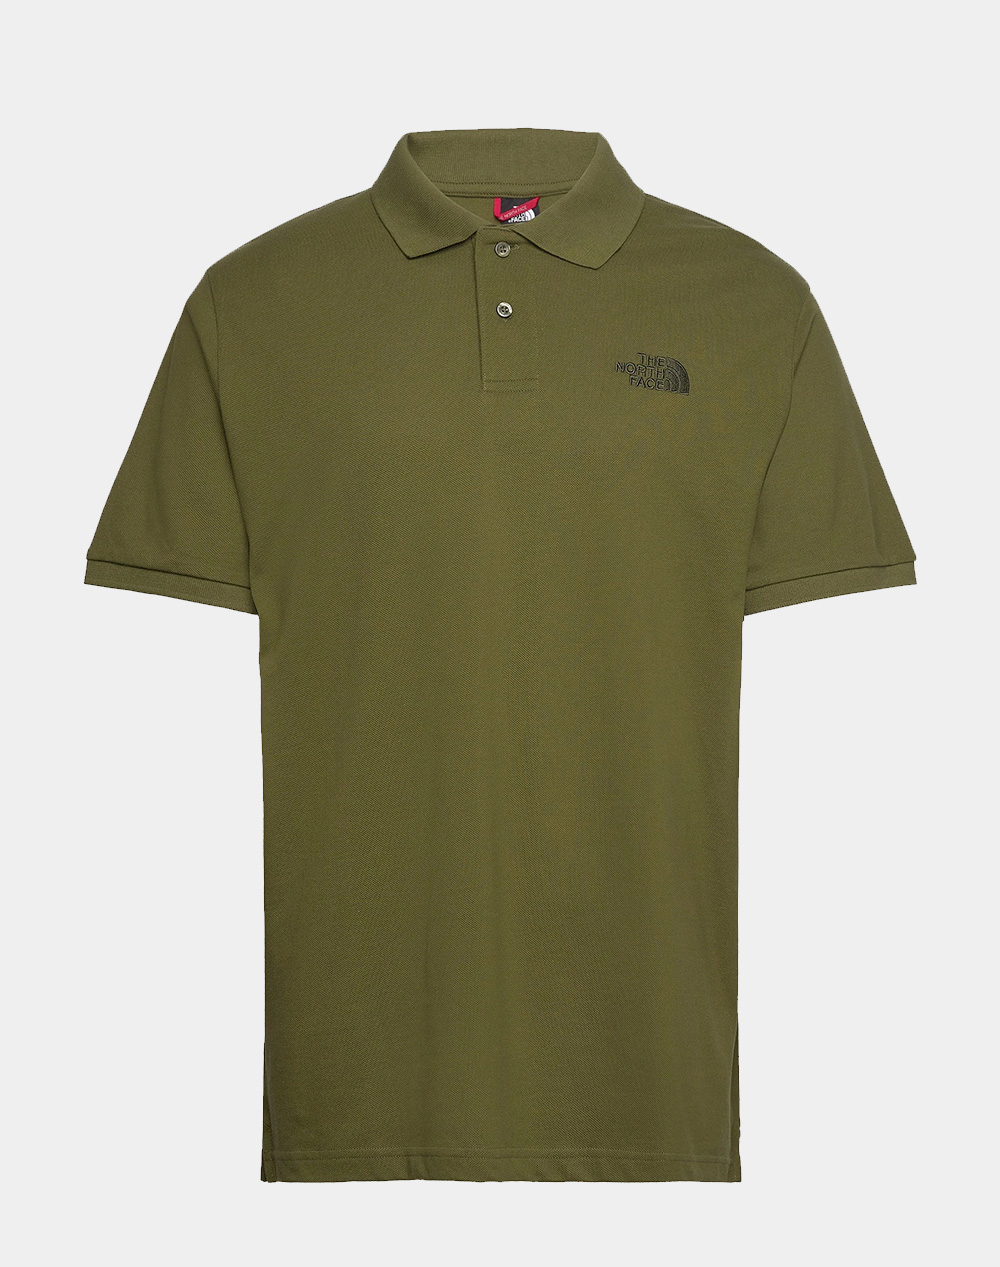 THE NORTH FACE M POLO PIQUET NF00CG71-NFPIB Olive